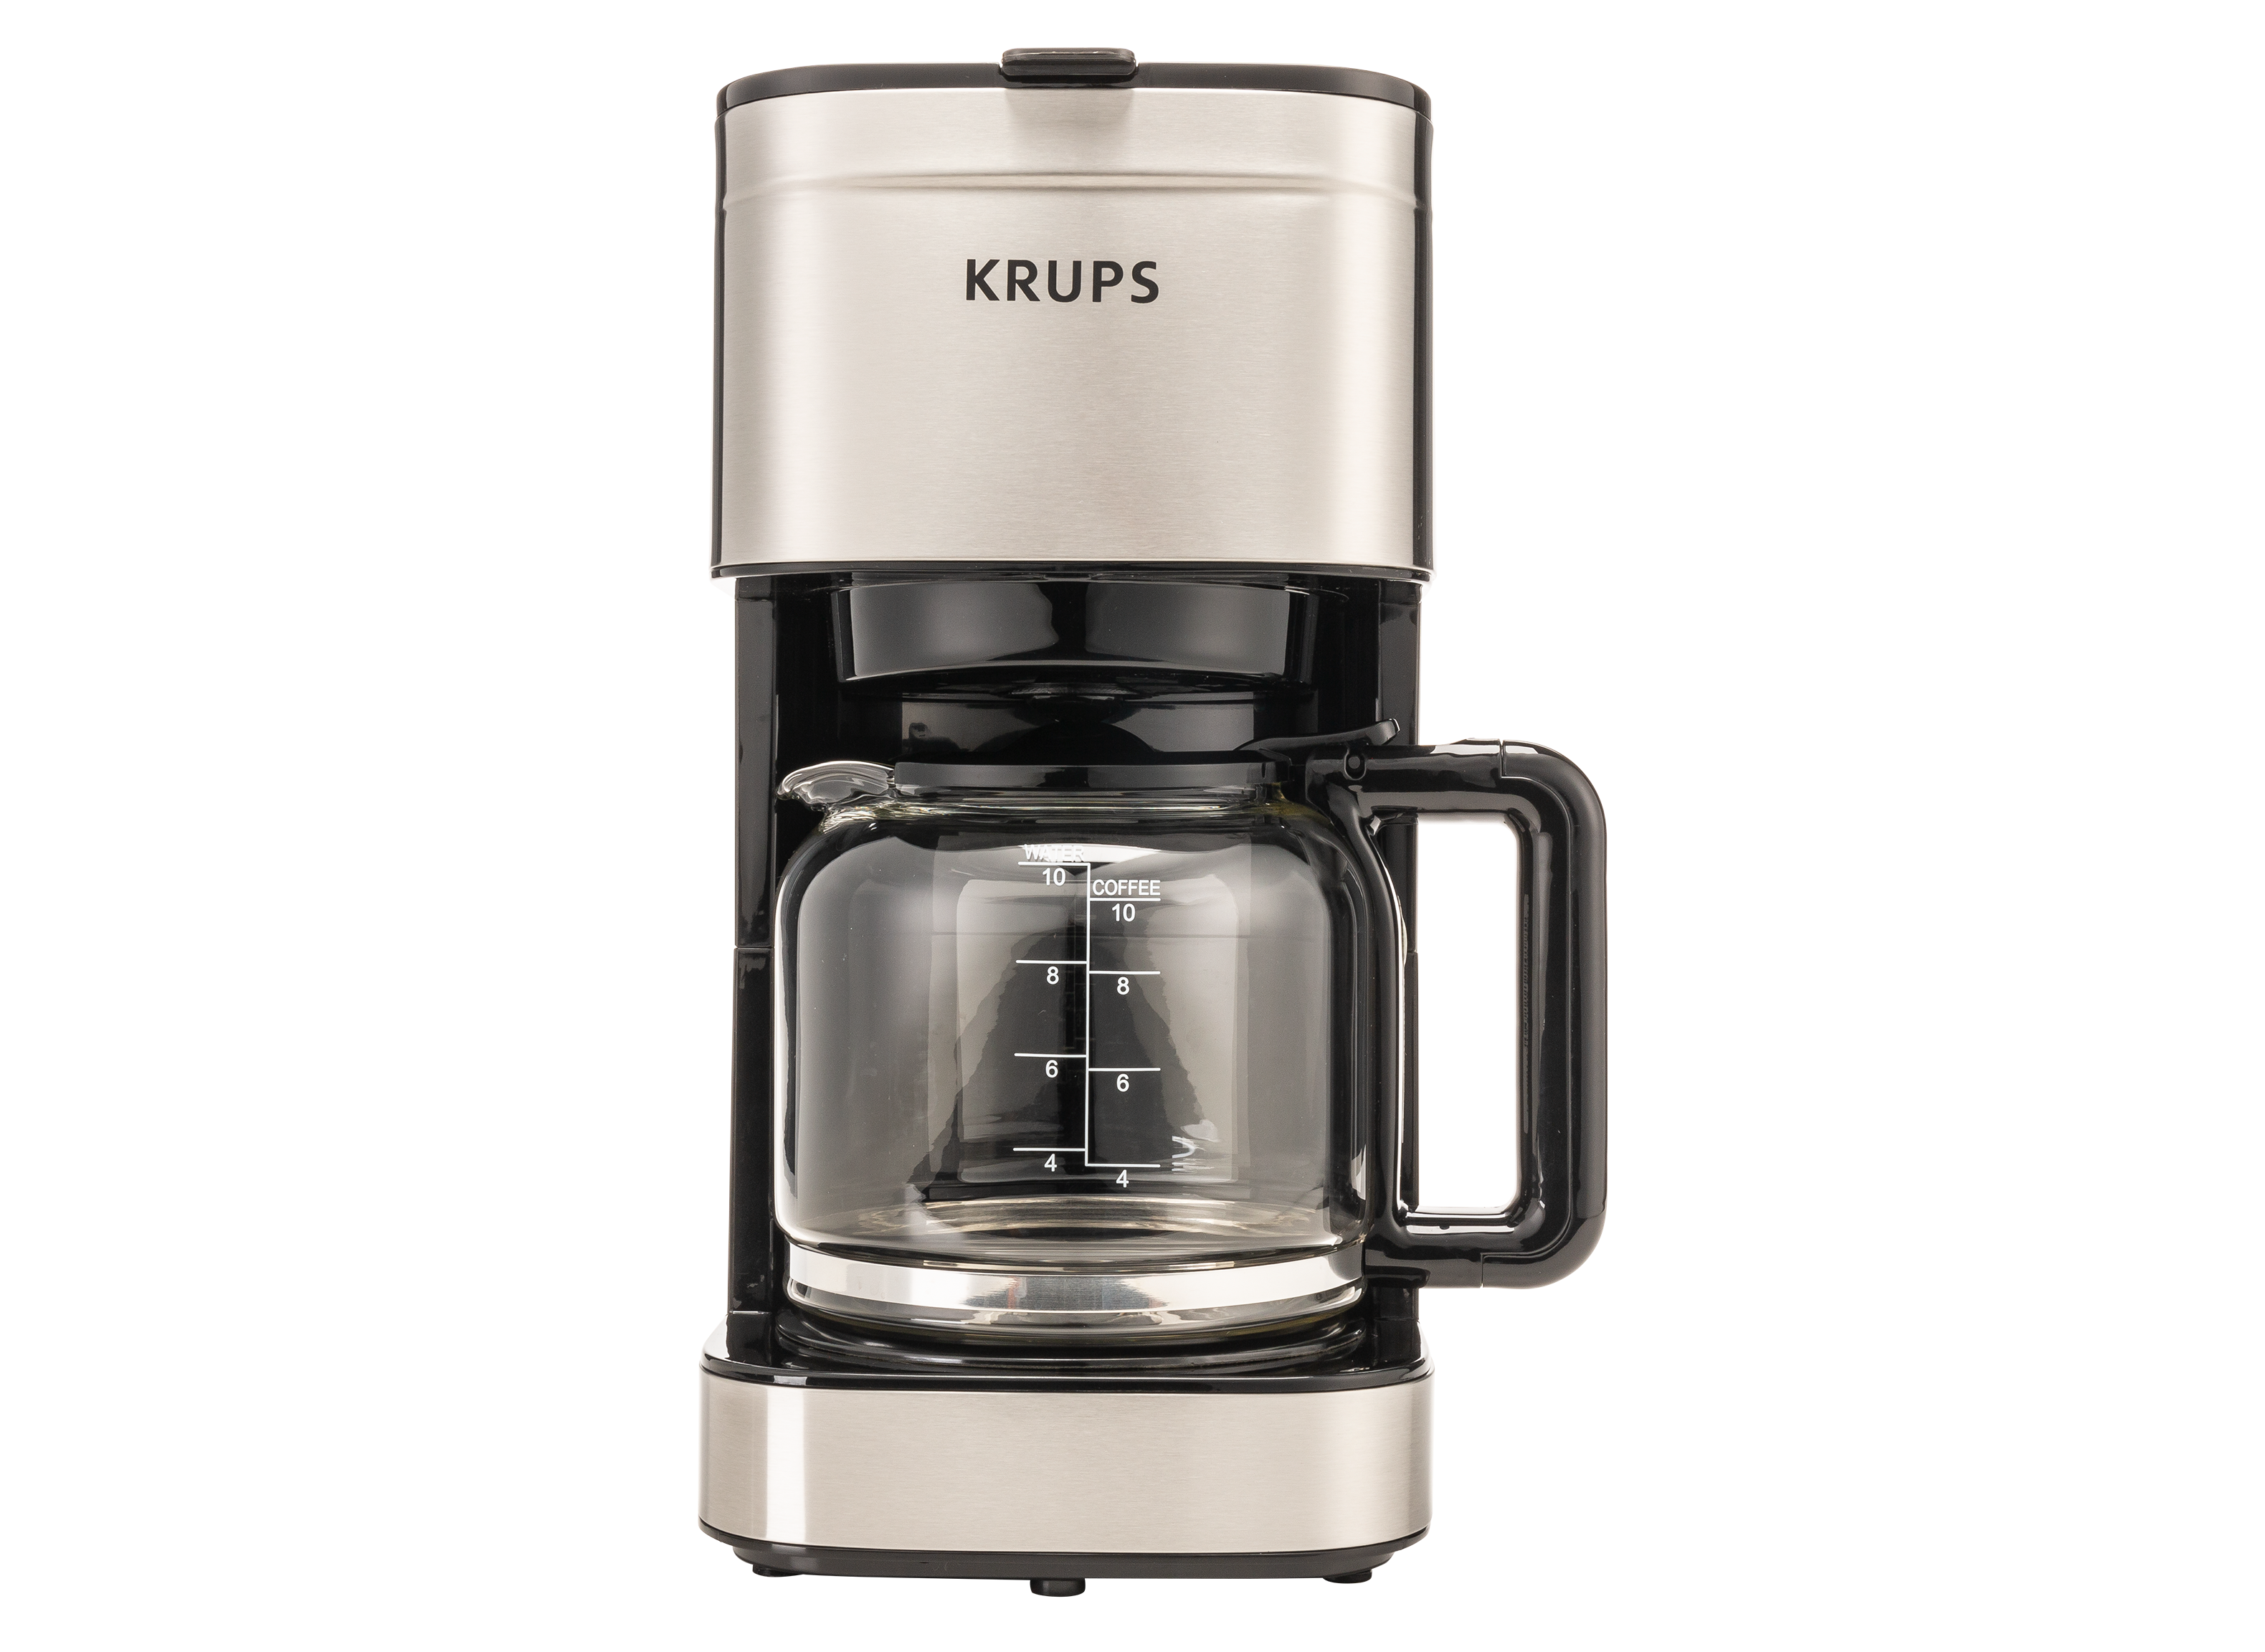 Krups Simply Brew Coffee Maker Review - Consumer Reports